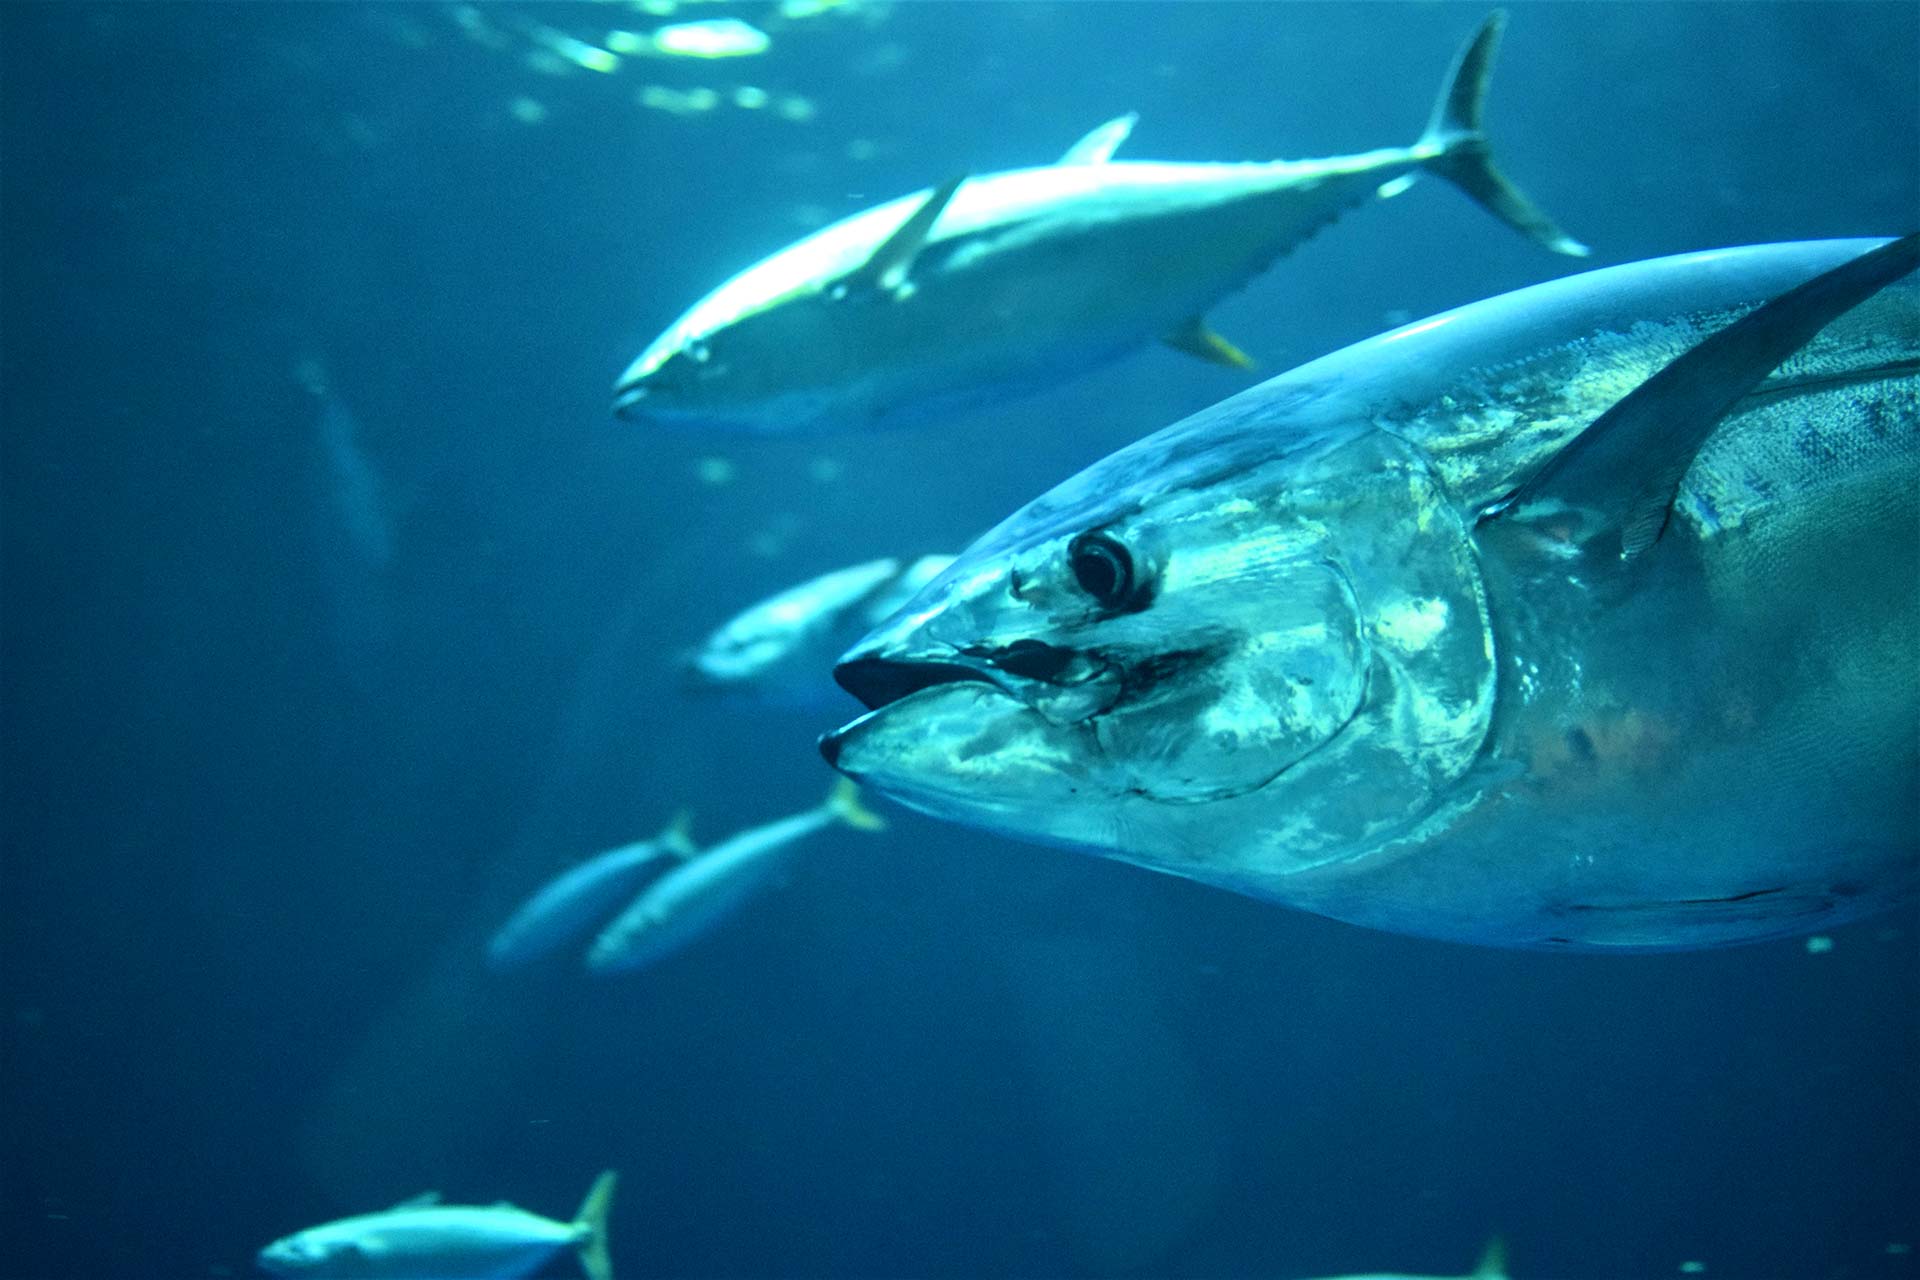 European Seafood Market Stakeholders Urge Adoption of Science-Based, Sustainable Tuna Management in the Atlantic